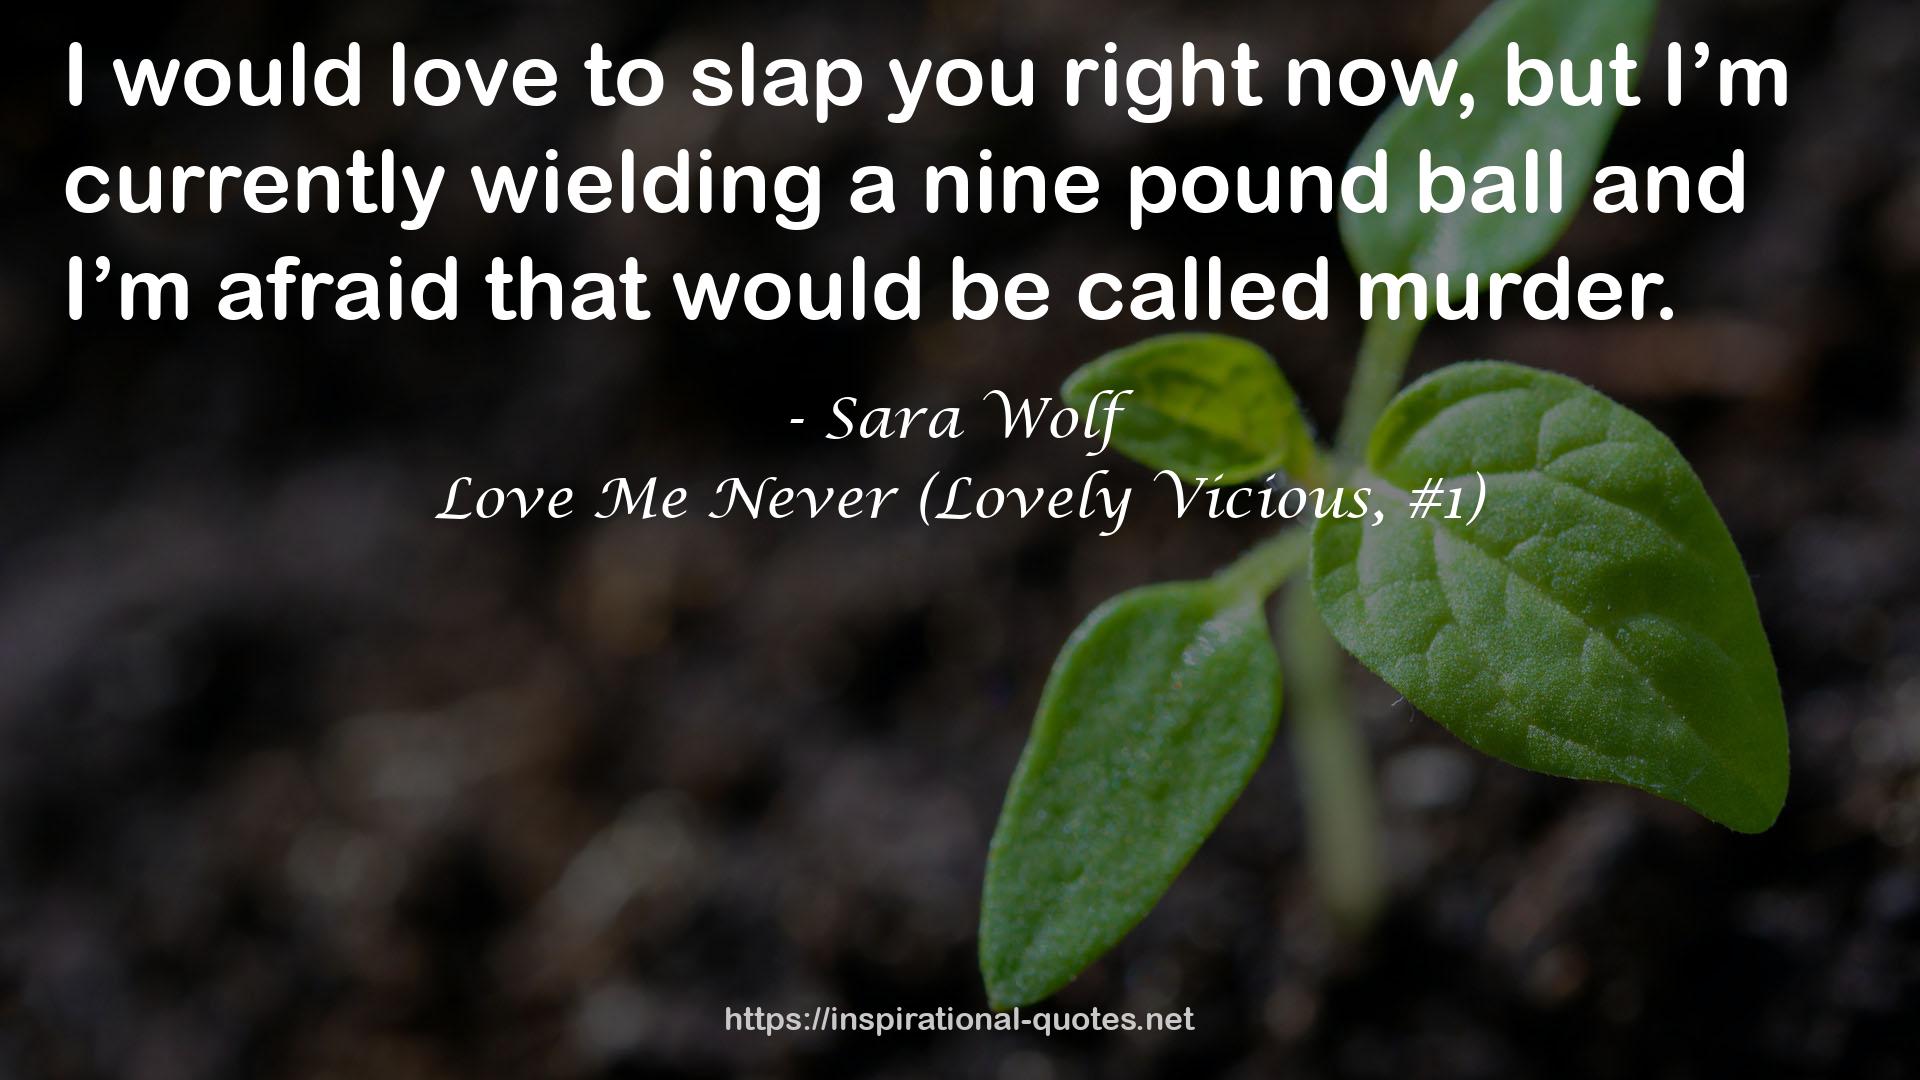 Love Me Never (Lovely Vicious, #1) QUOTES